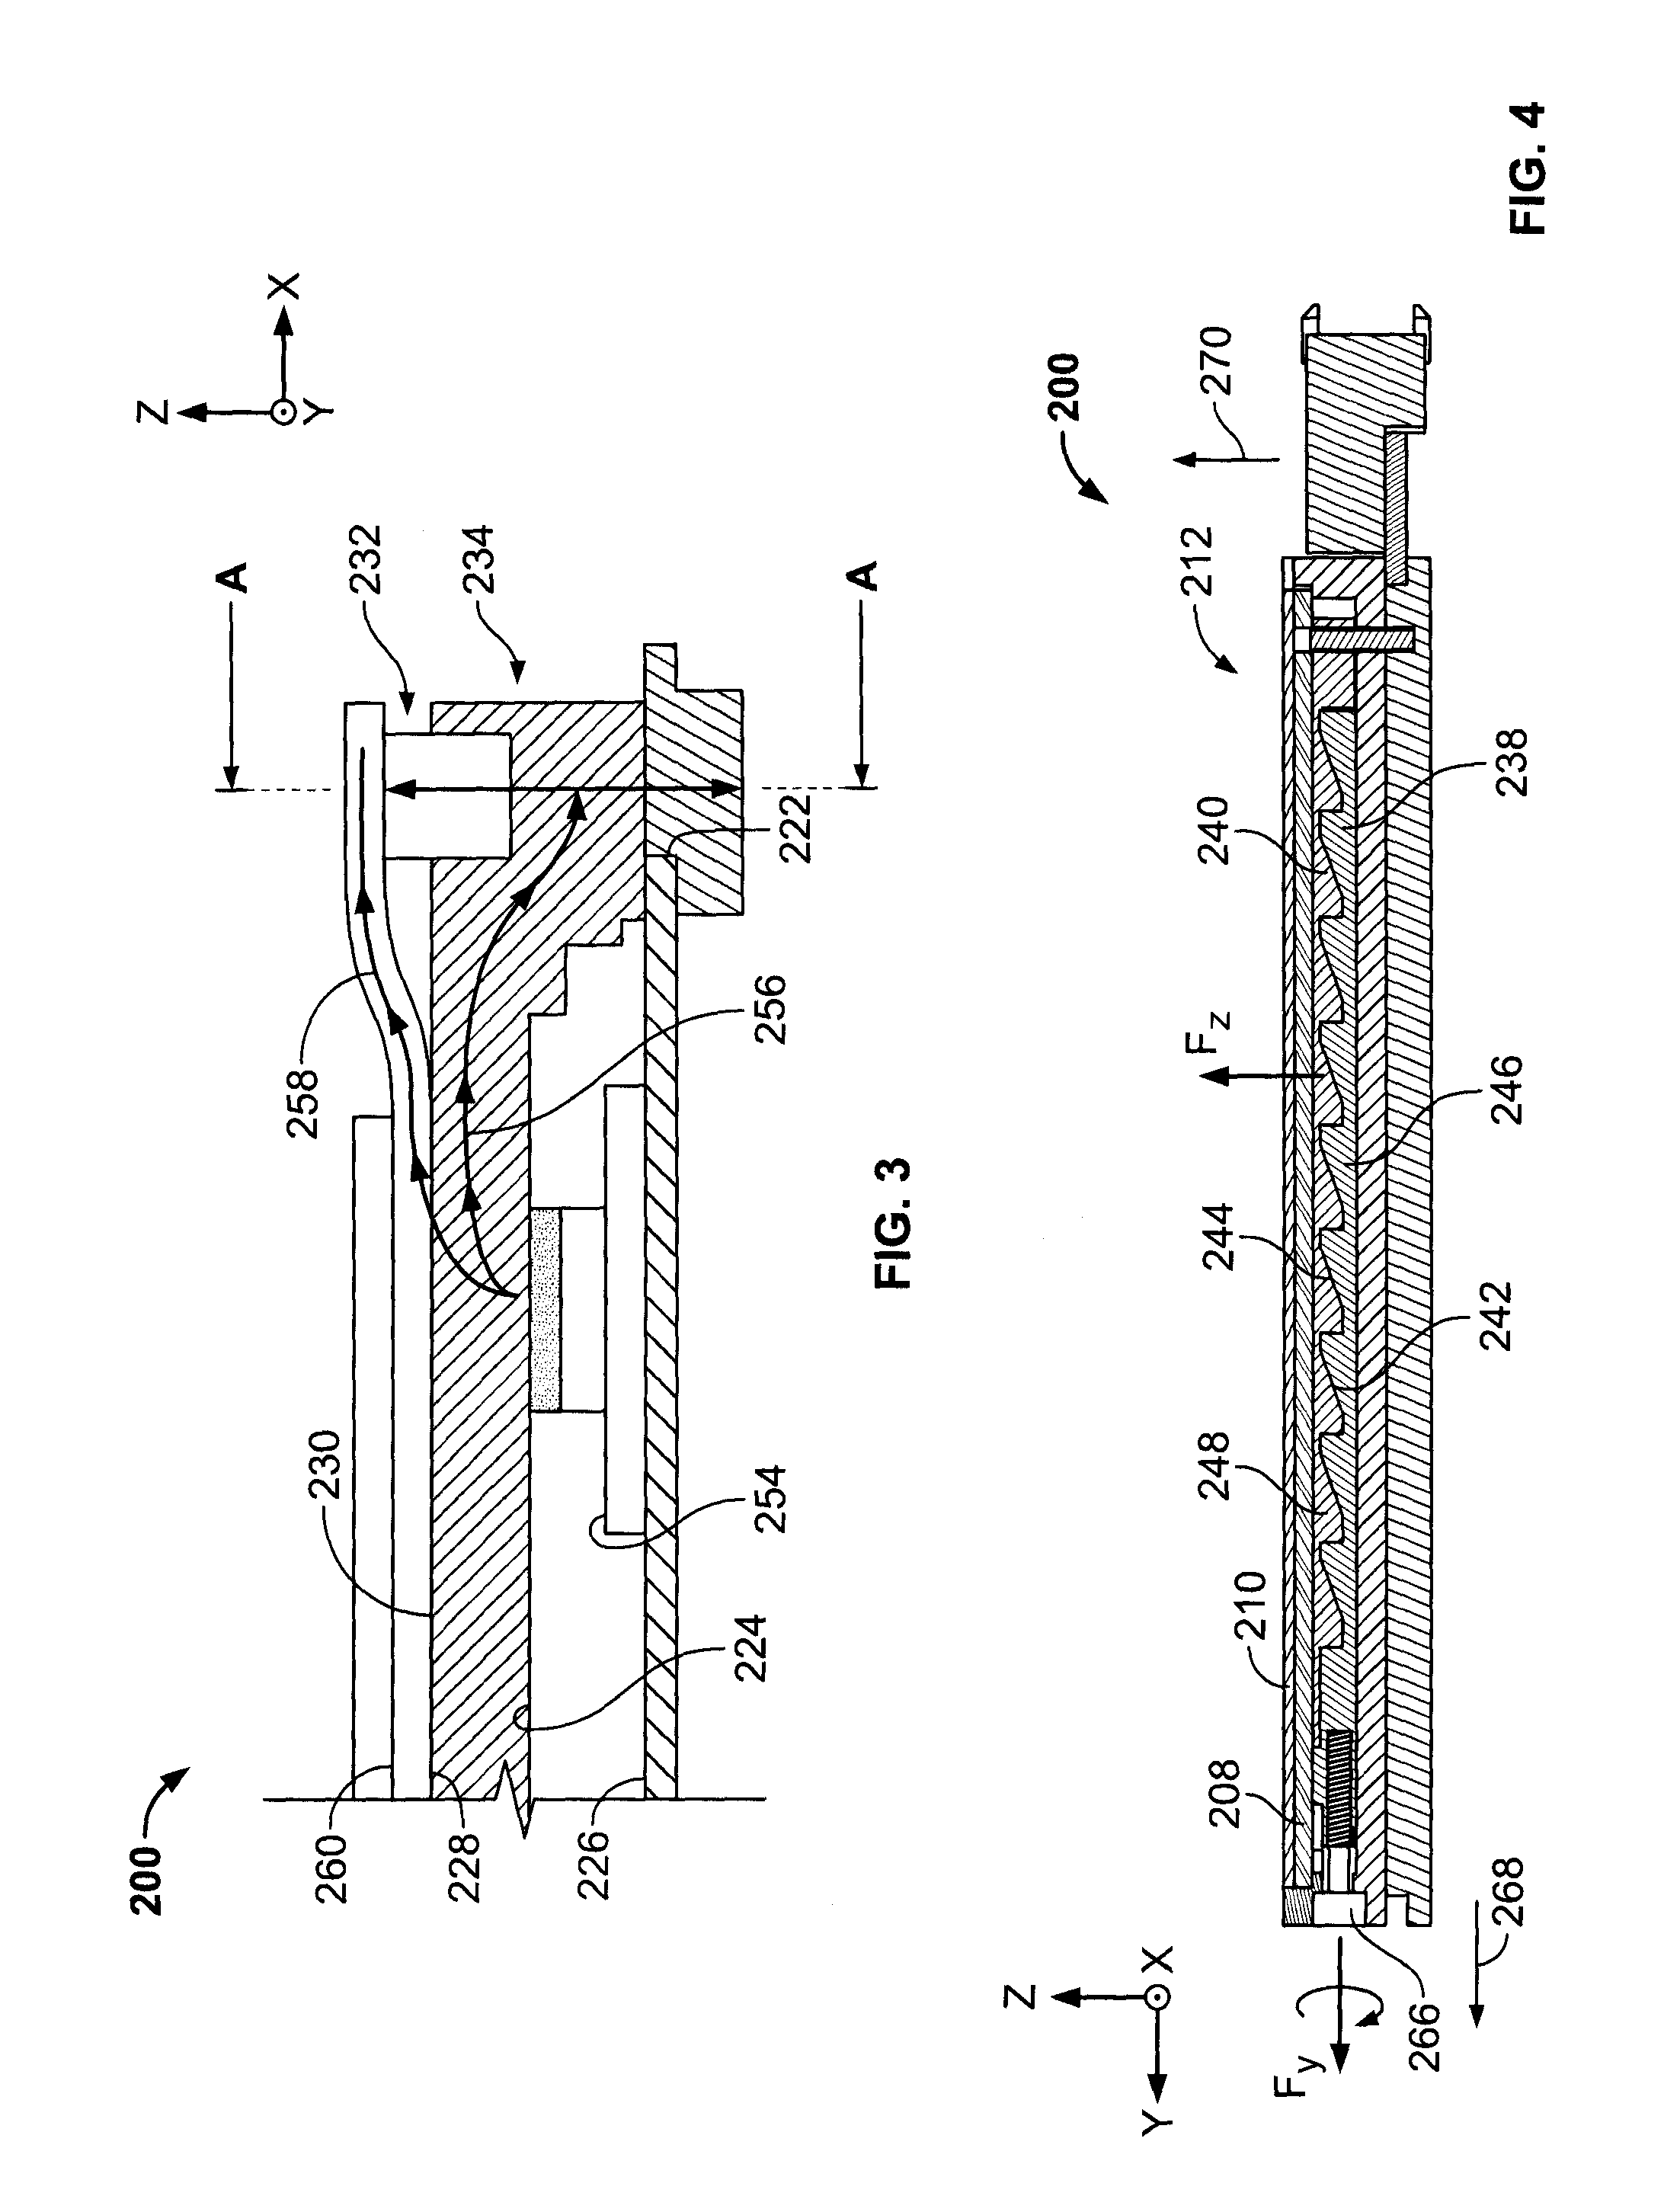 Wedge lock for use with a single board computer, a single board computer, and method of assembling a computer system